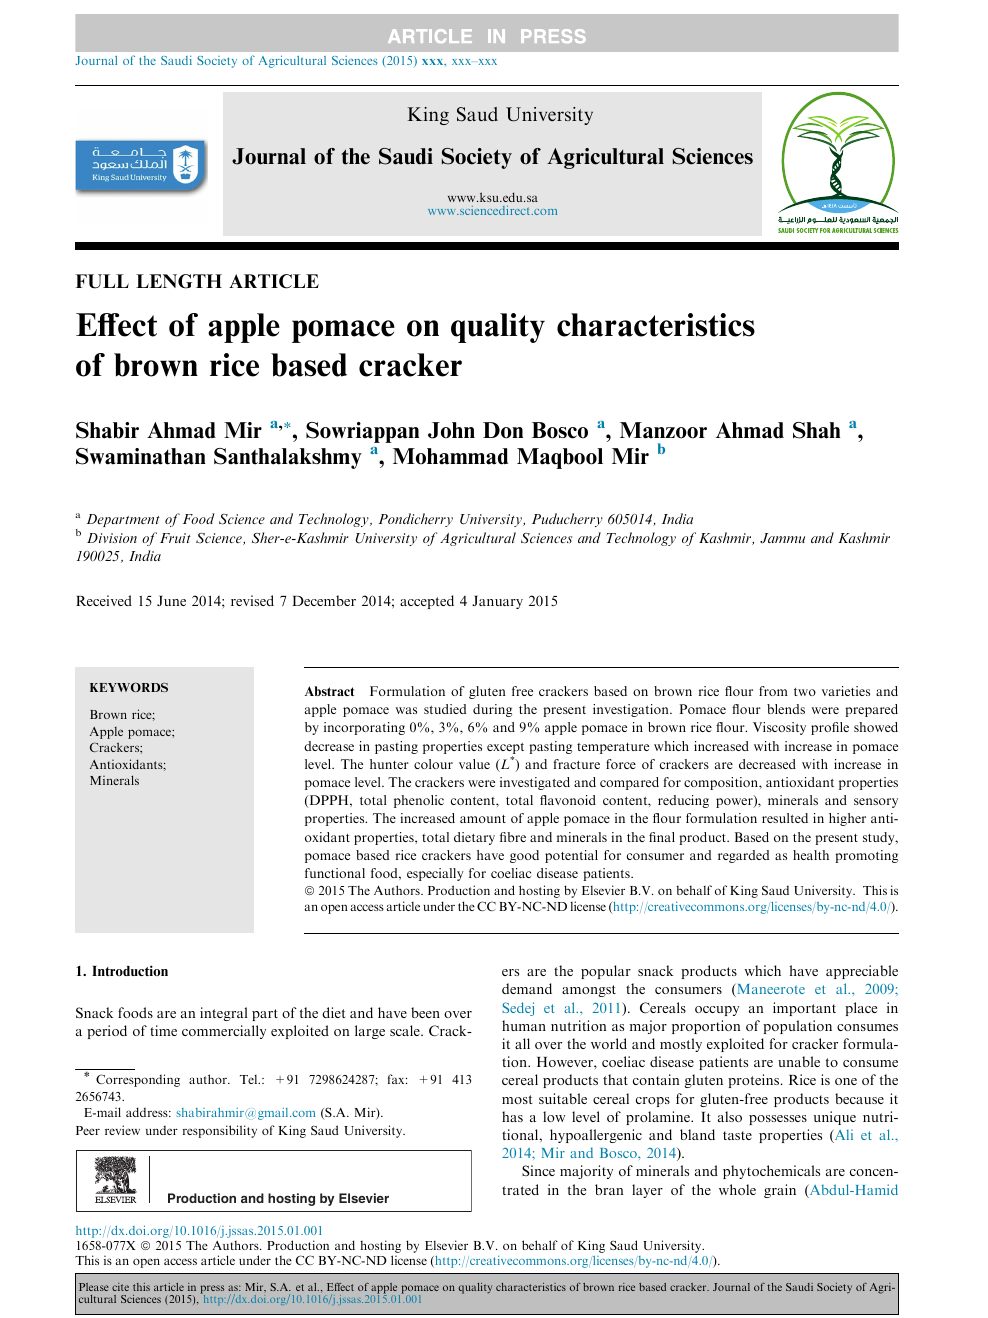 Effect Of Apple Pomace On Quality Characteristics Of Brown Rice Based Cracker Topic Of Research Paper In Agriculture Forestry And Fisheries Download Scholarly Article Pdf And Read For Free On Cyberleninka